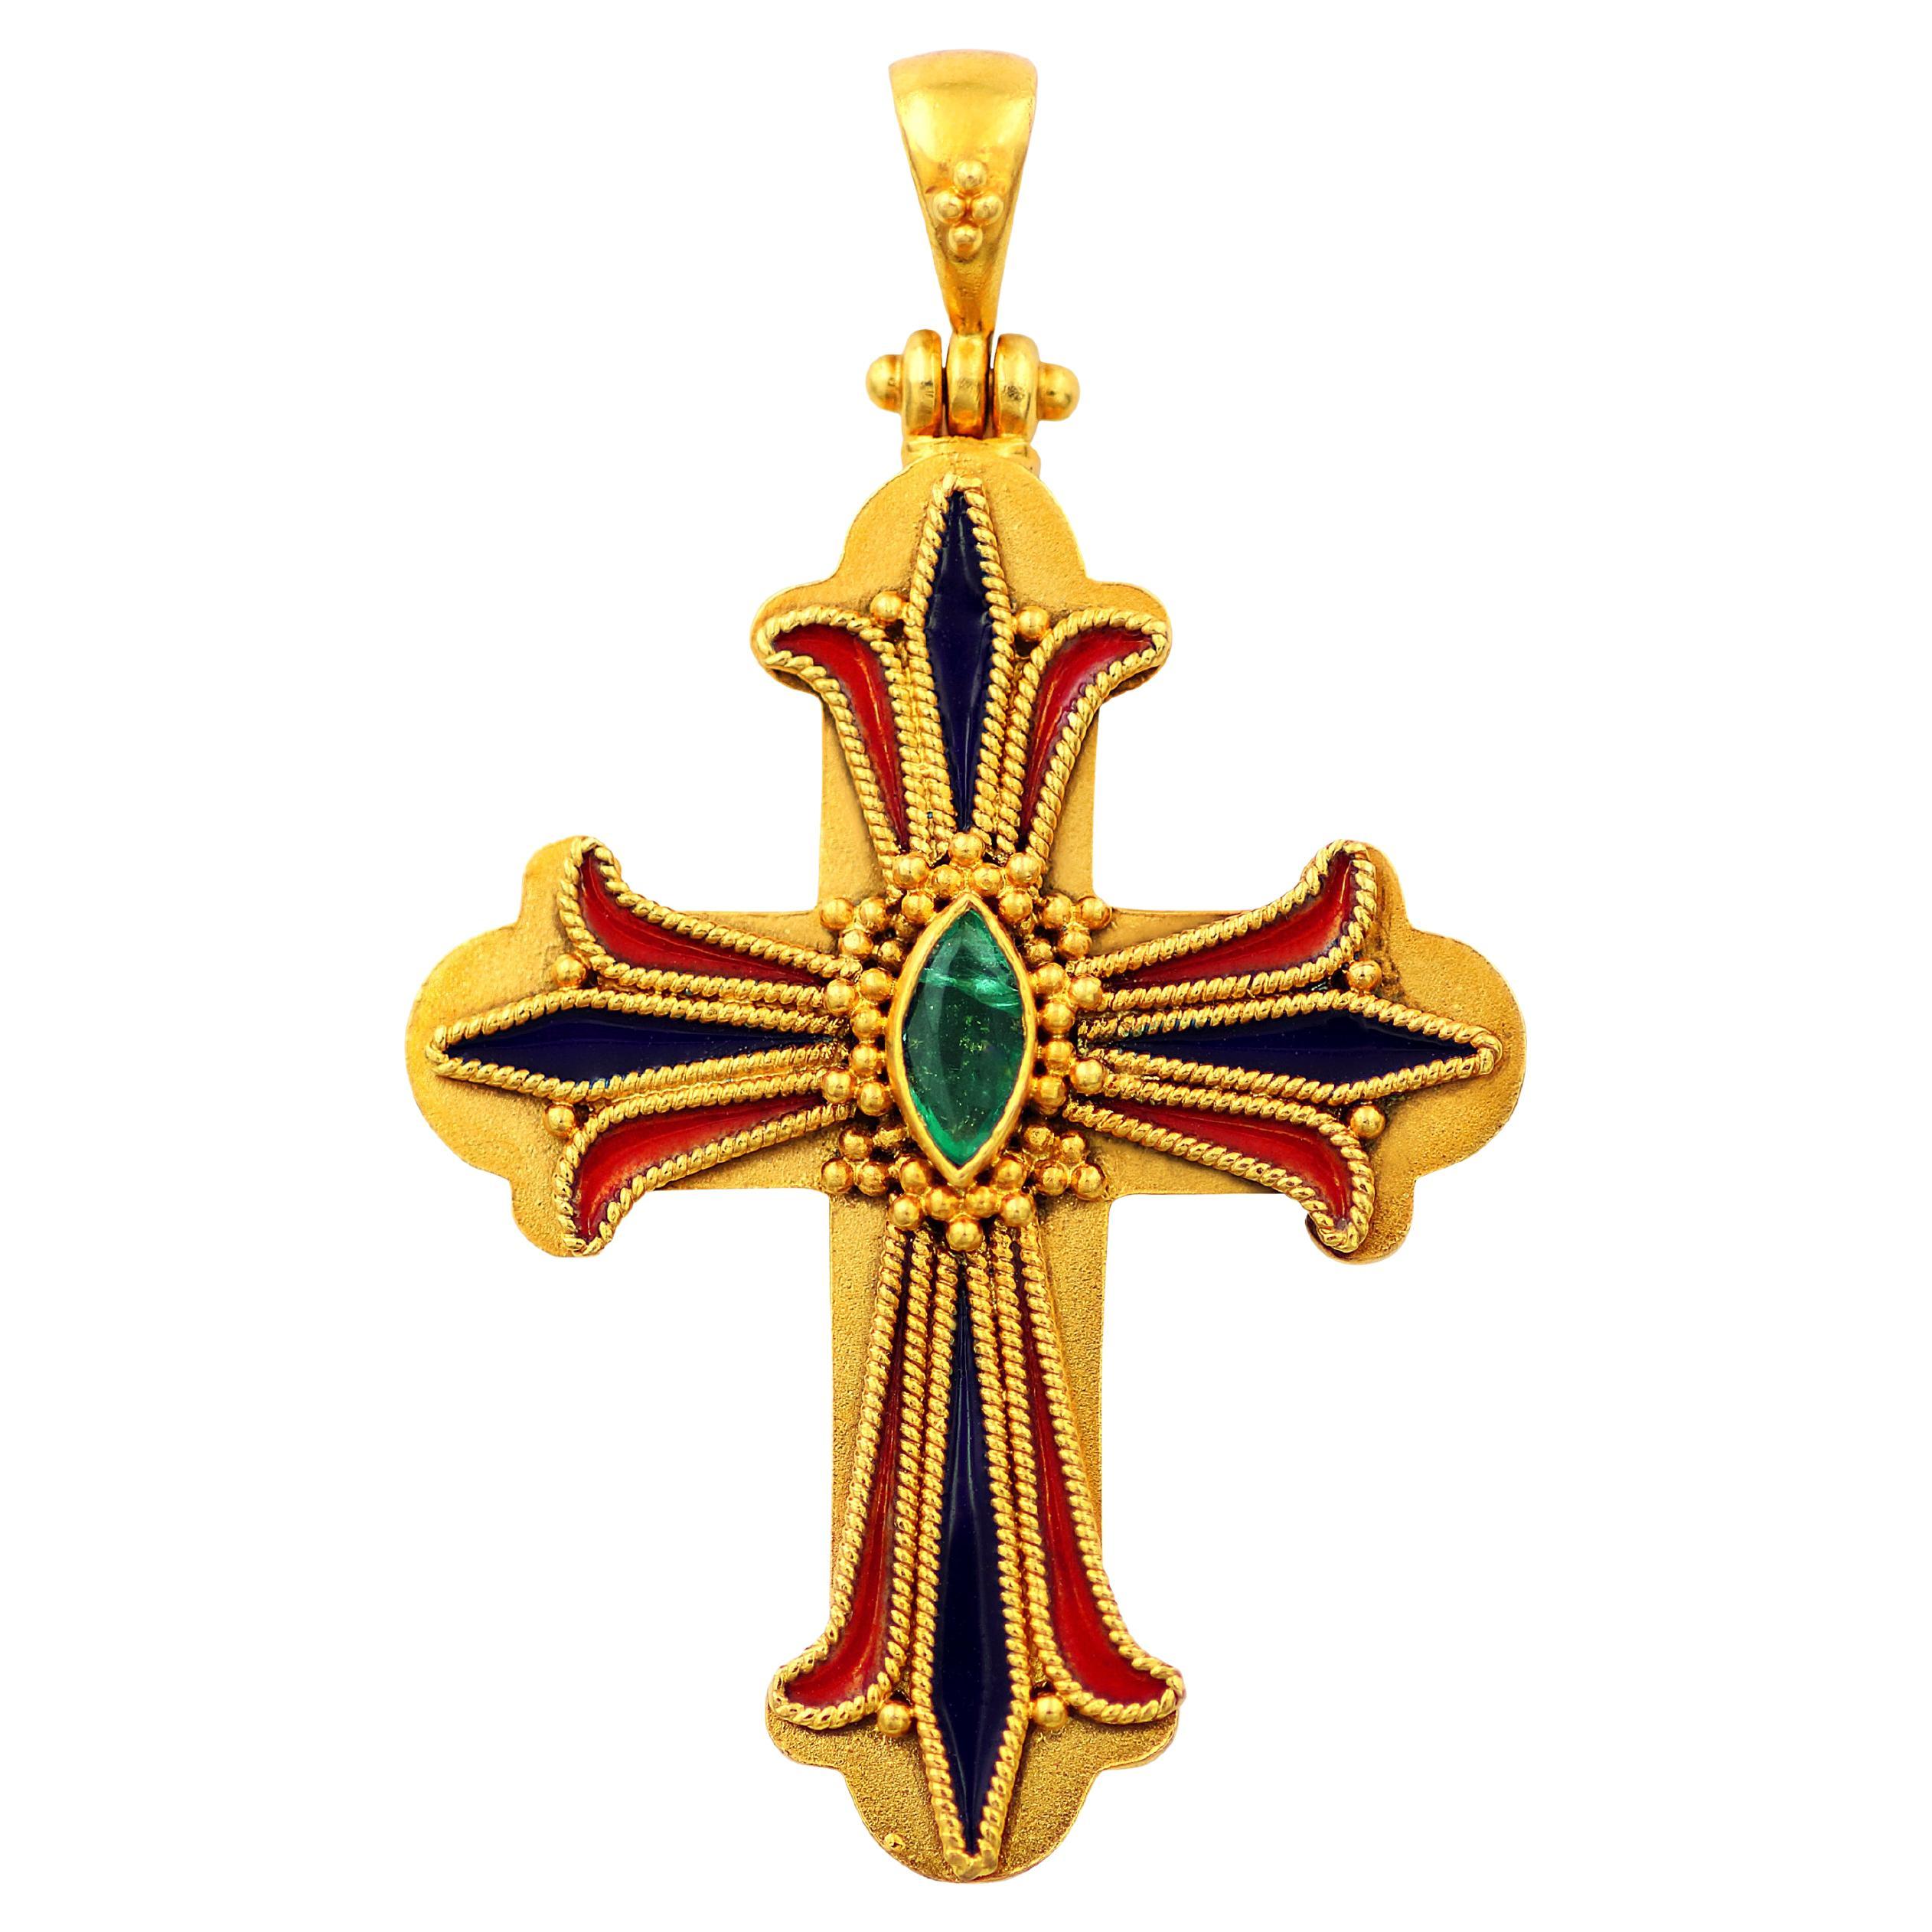 Dimos 22k Gold Byzantine Filigree Cross with Marquise Cut Emerald